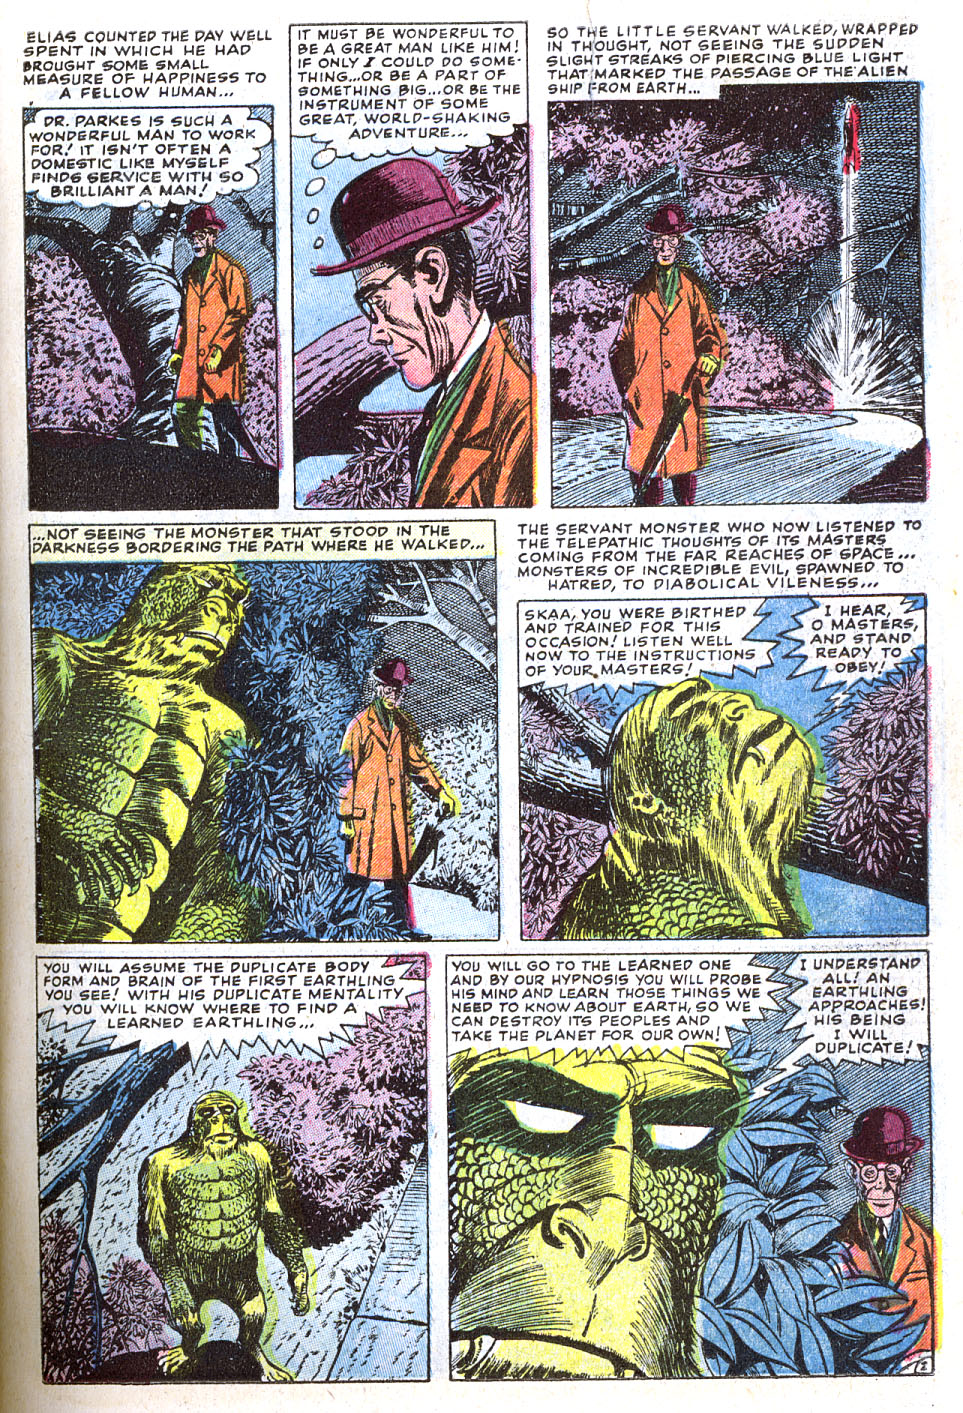 Journey Into Mystery (1952) 19 Page 10